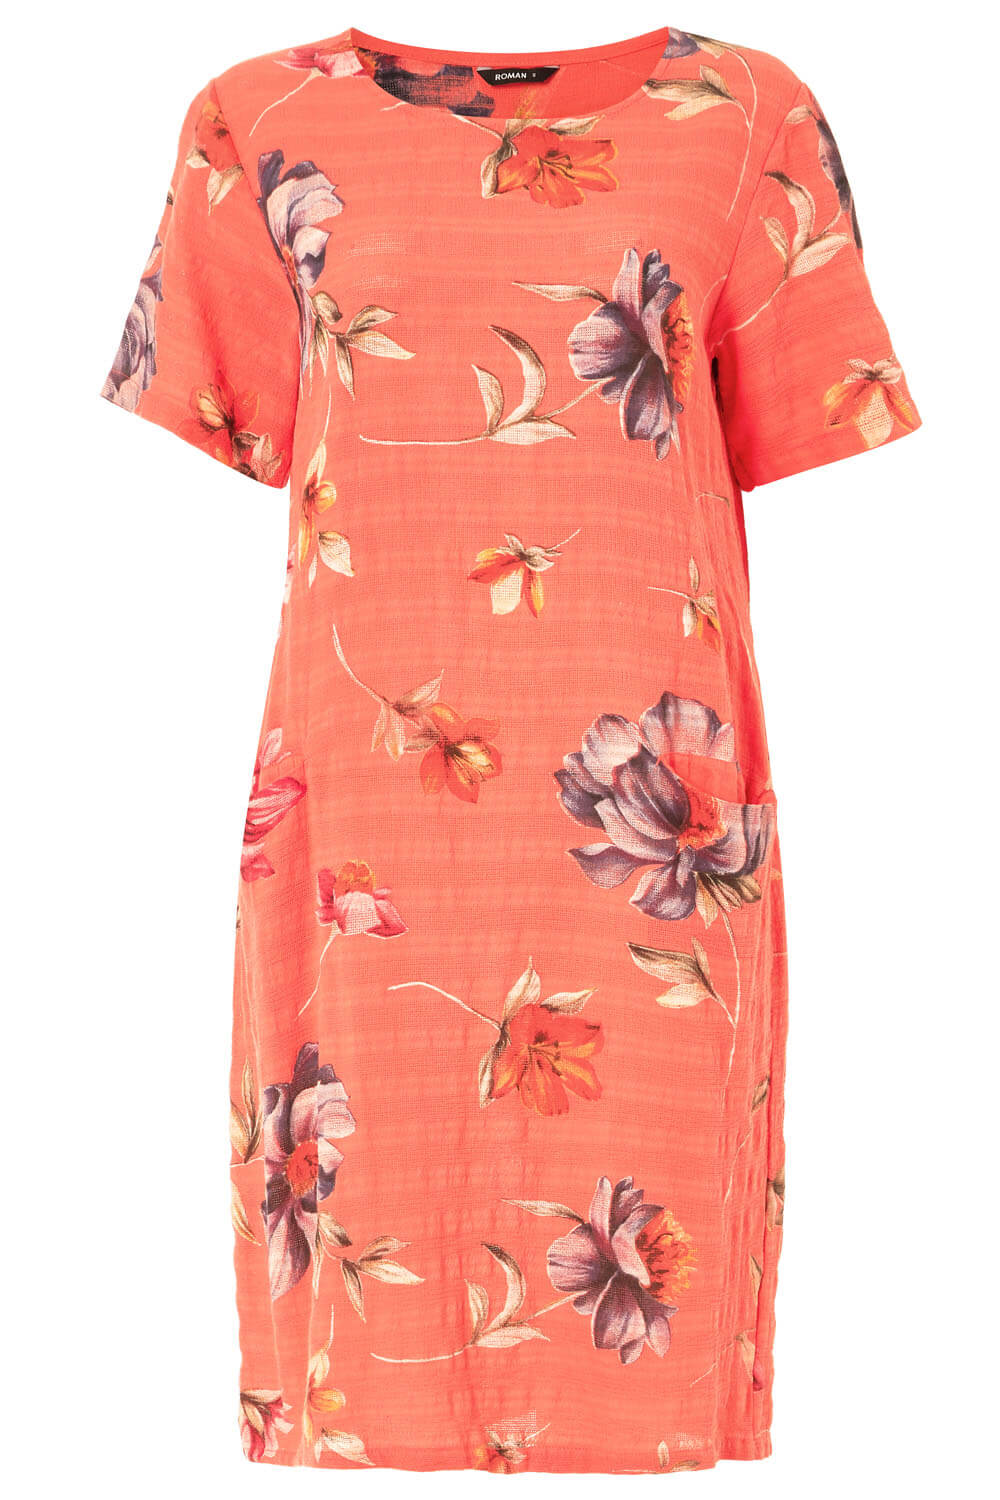 CORAL Floral Textured Cotton Cocoon Dress, Image 5 of 5